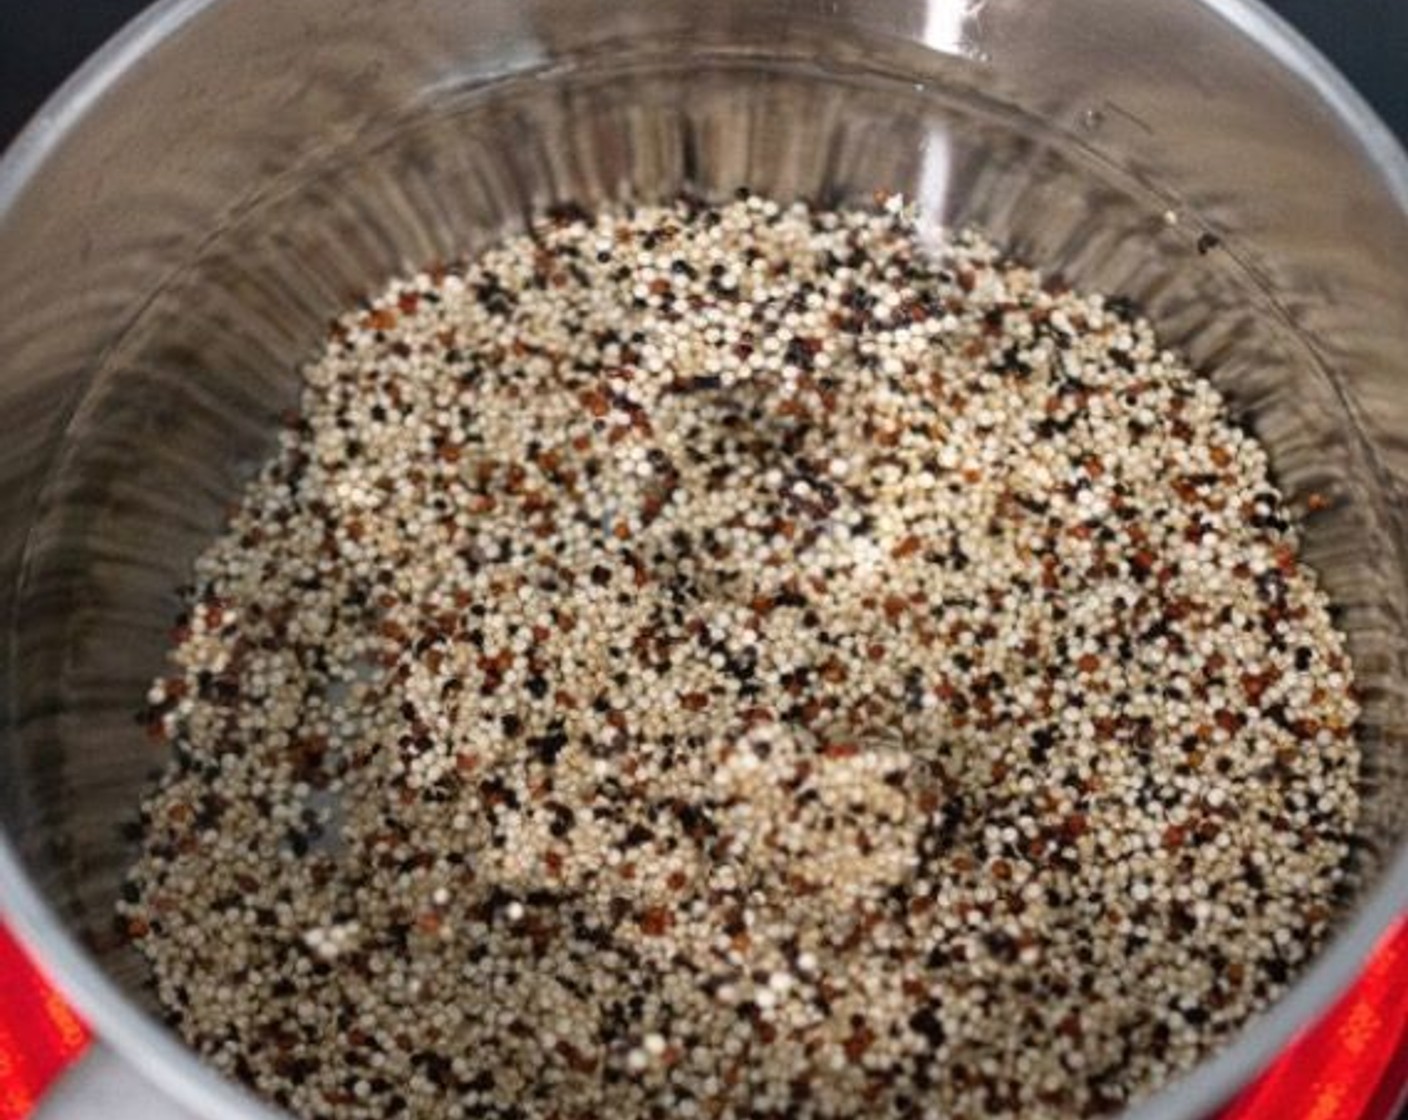 step 2 Cook the Quinoa (1 cup) in salted water. For timing and water amounts, follow the instructions on the packaging. It should take around 10 minutes.